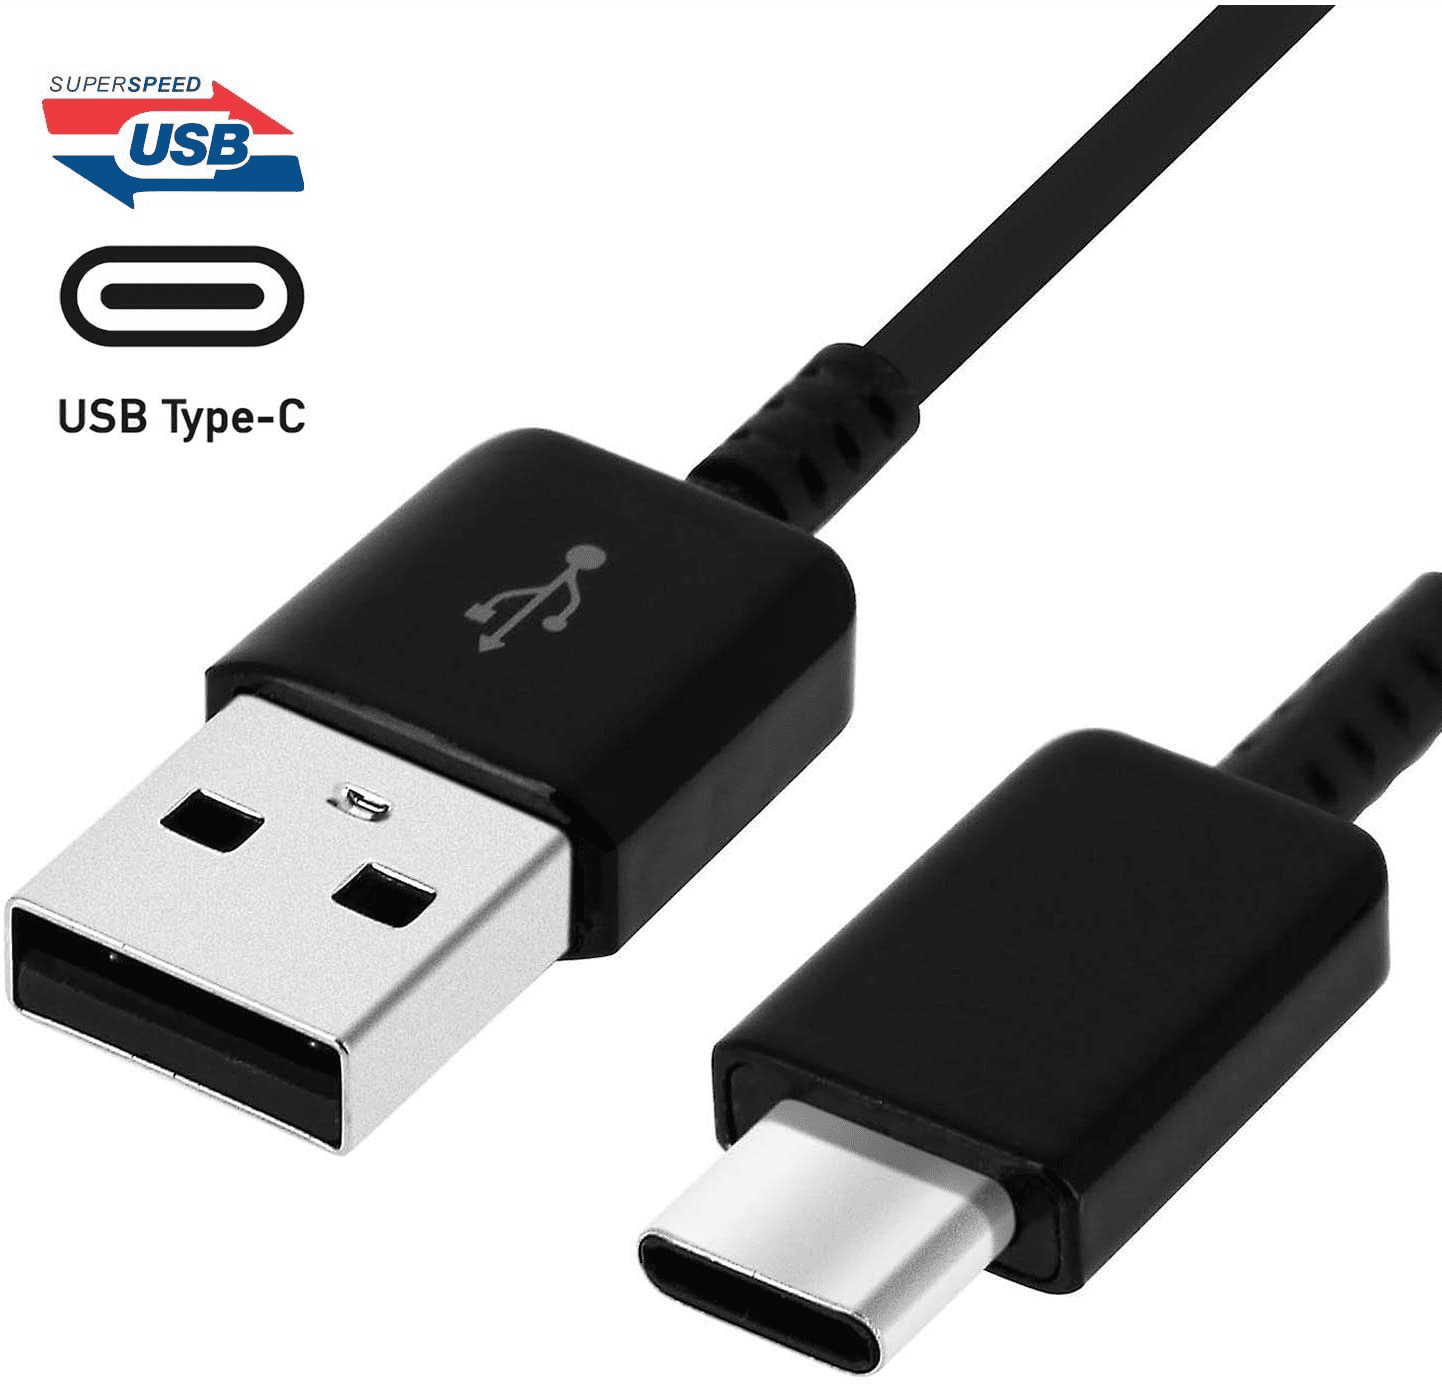 OEM Adaptive Fast Charger for Nokia 8 15W with Certified USB Type-C Data and Charging Cable. Black 3.3FT 1M Cable